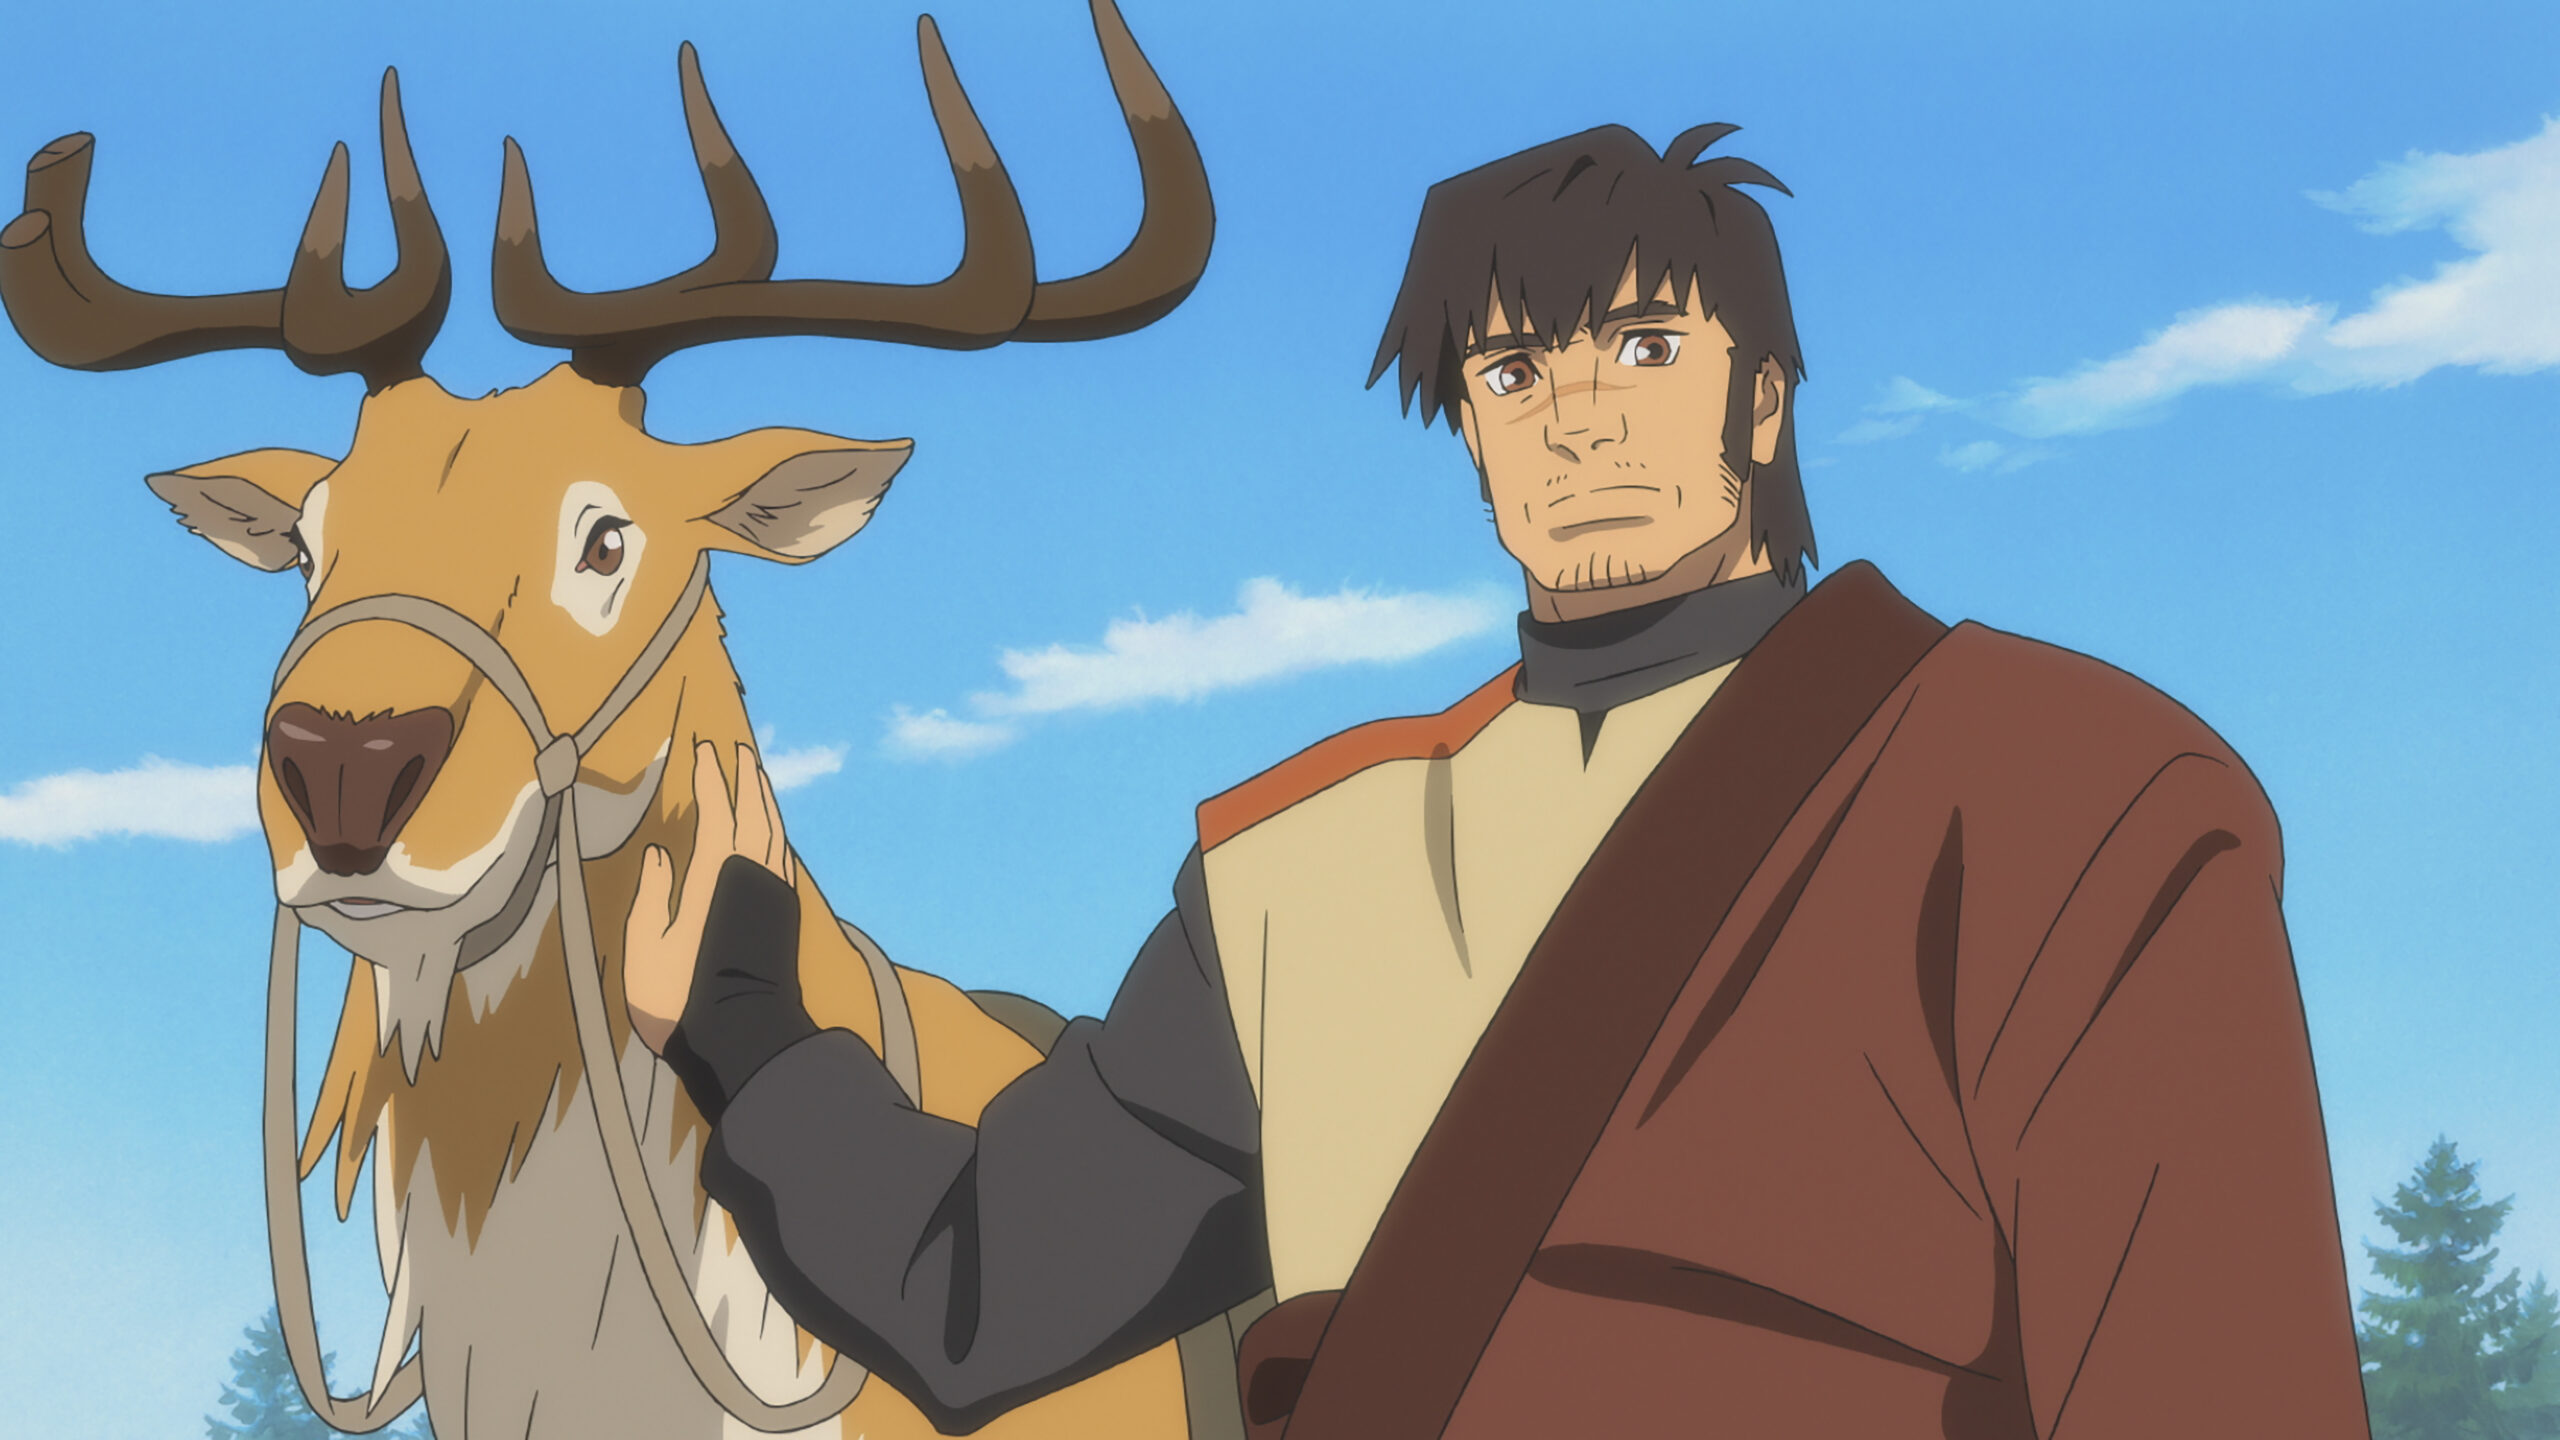 Anime fantasy epic ‘The Deer King’ releases in U.S. theaters this July